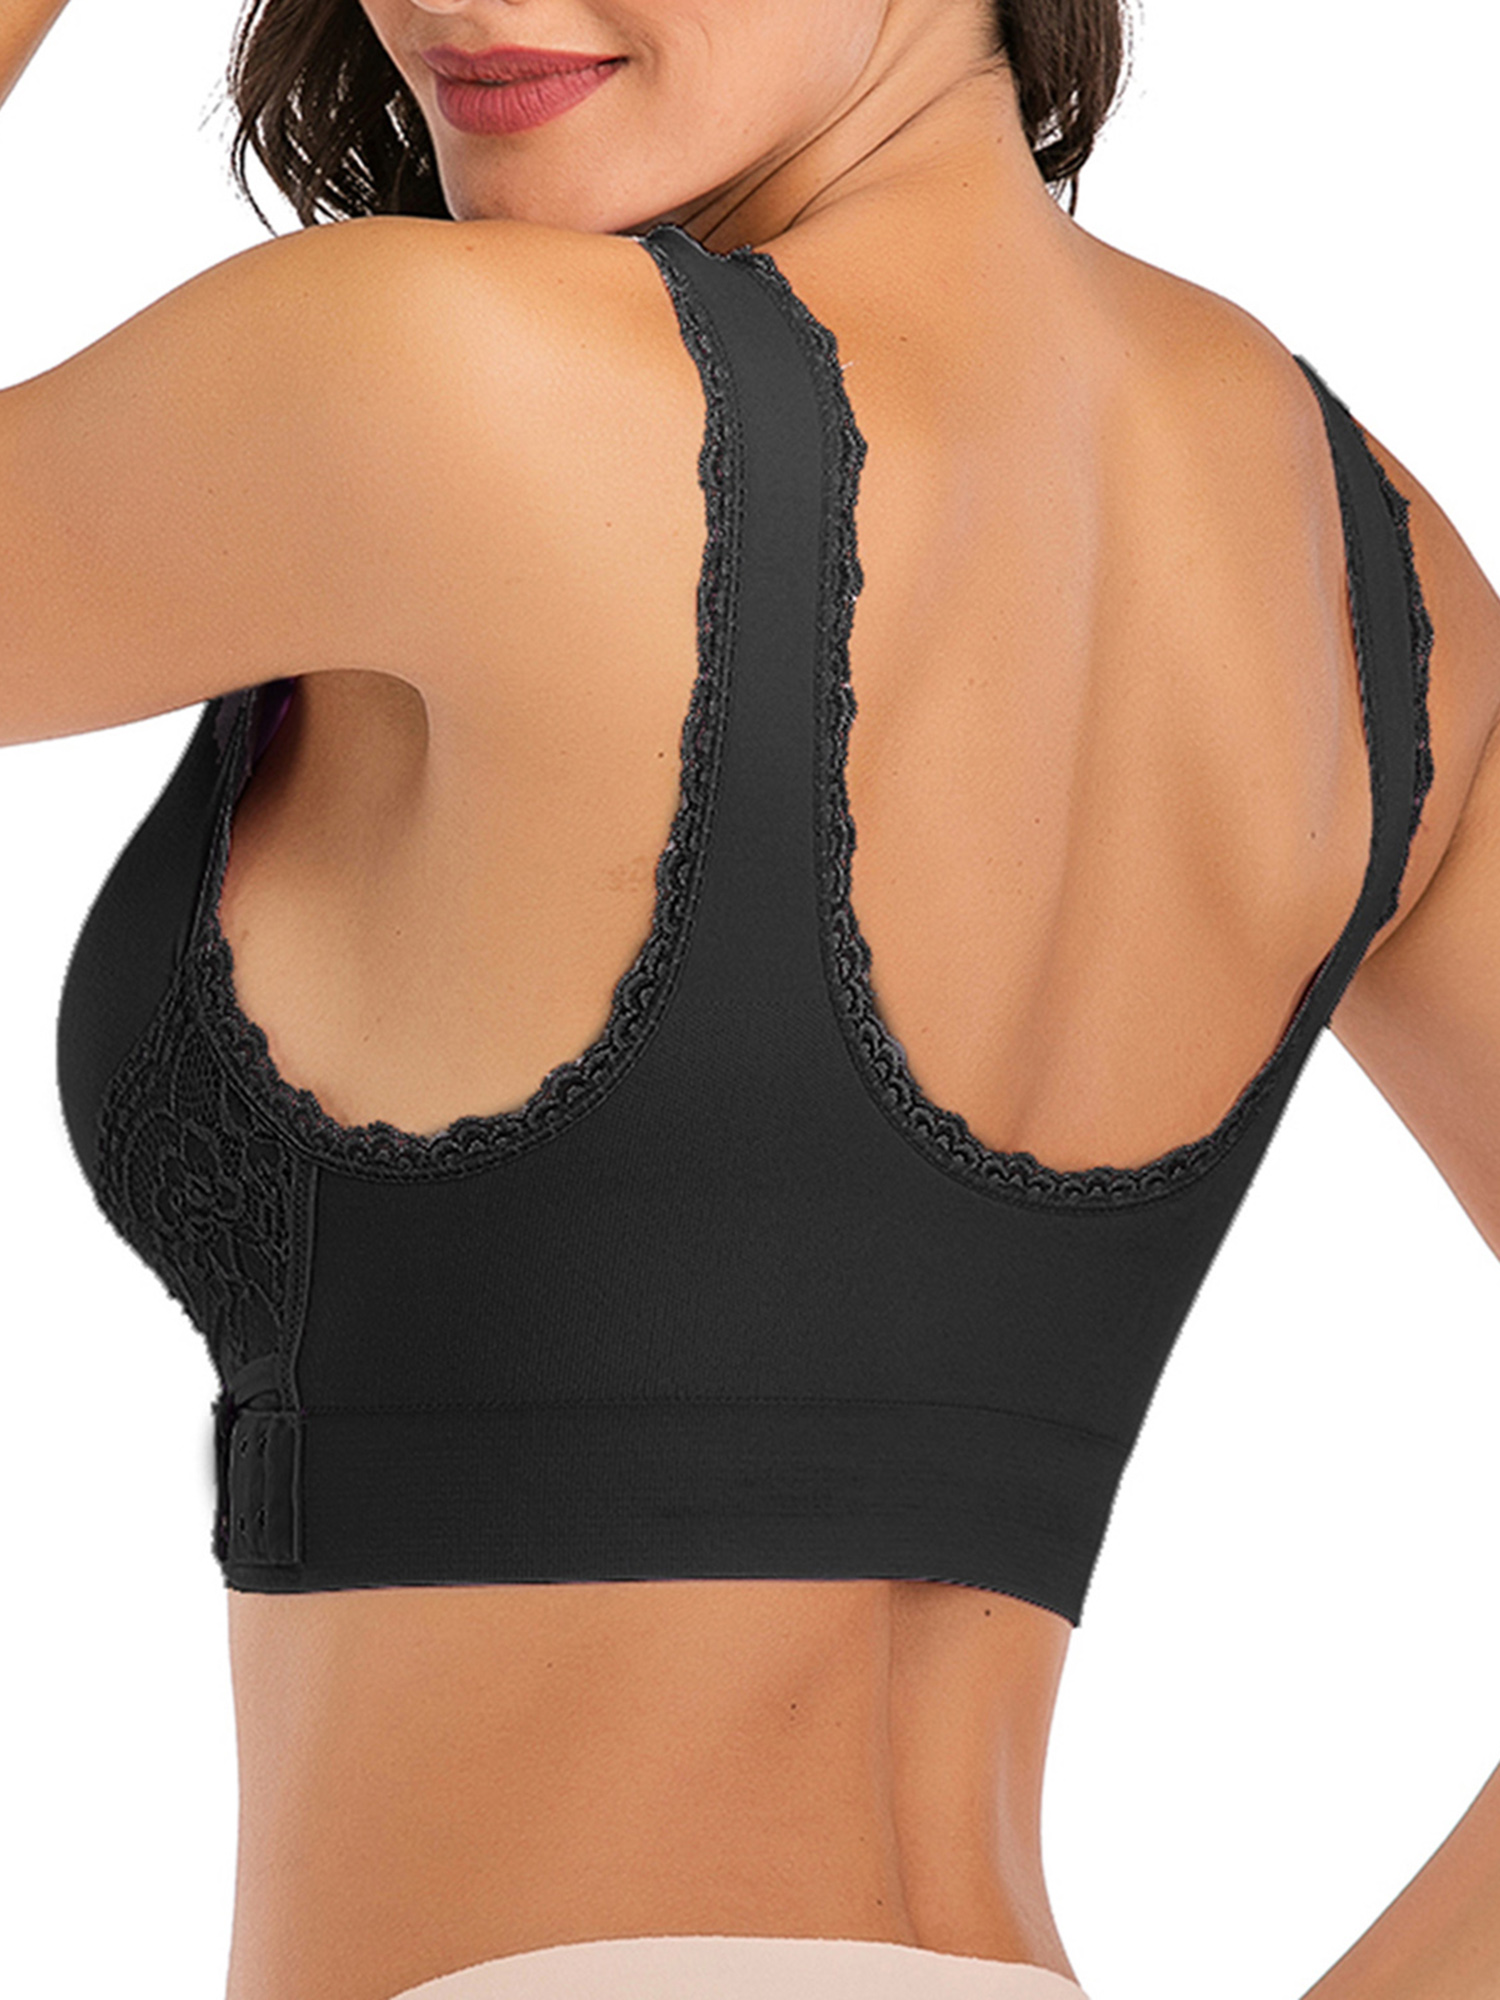 FUTATA Sports Bras For Women Padded Lace Front Buckle Lace Post Op Bras Seamless Yoga Bras Activewear Tops For Running Workout Gym,1/3 Pack - image 2 of 6